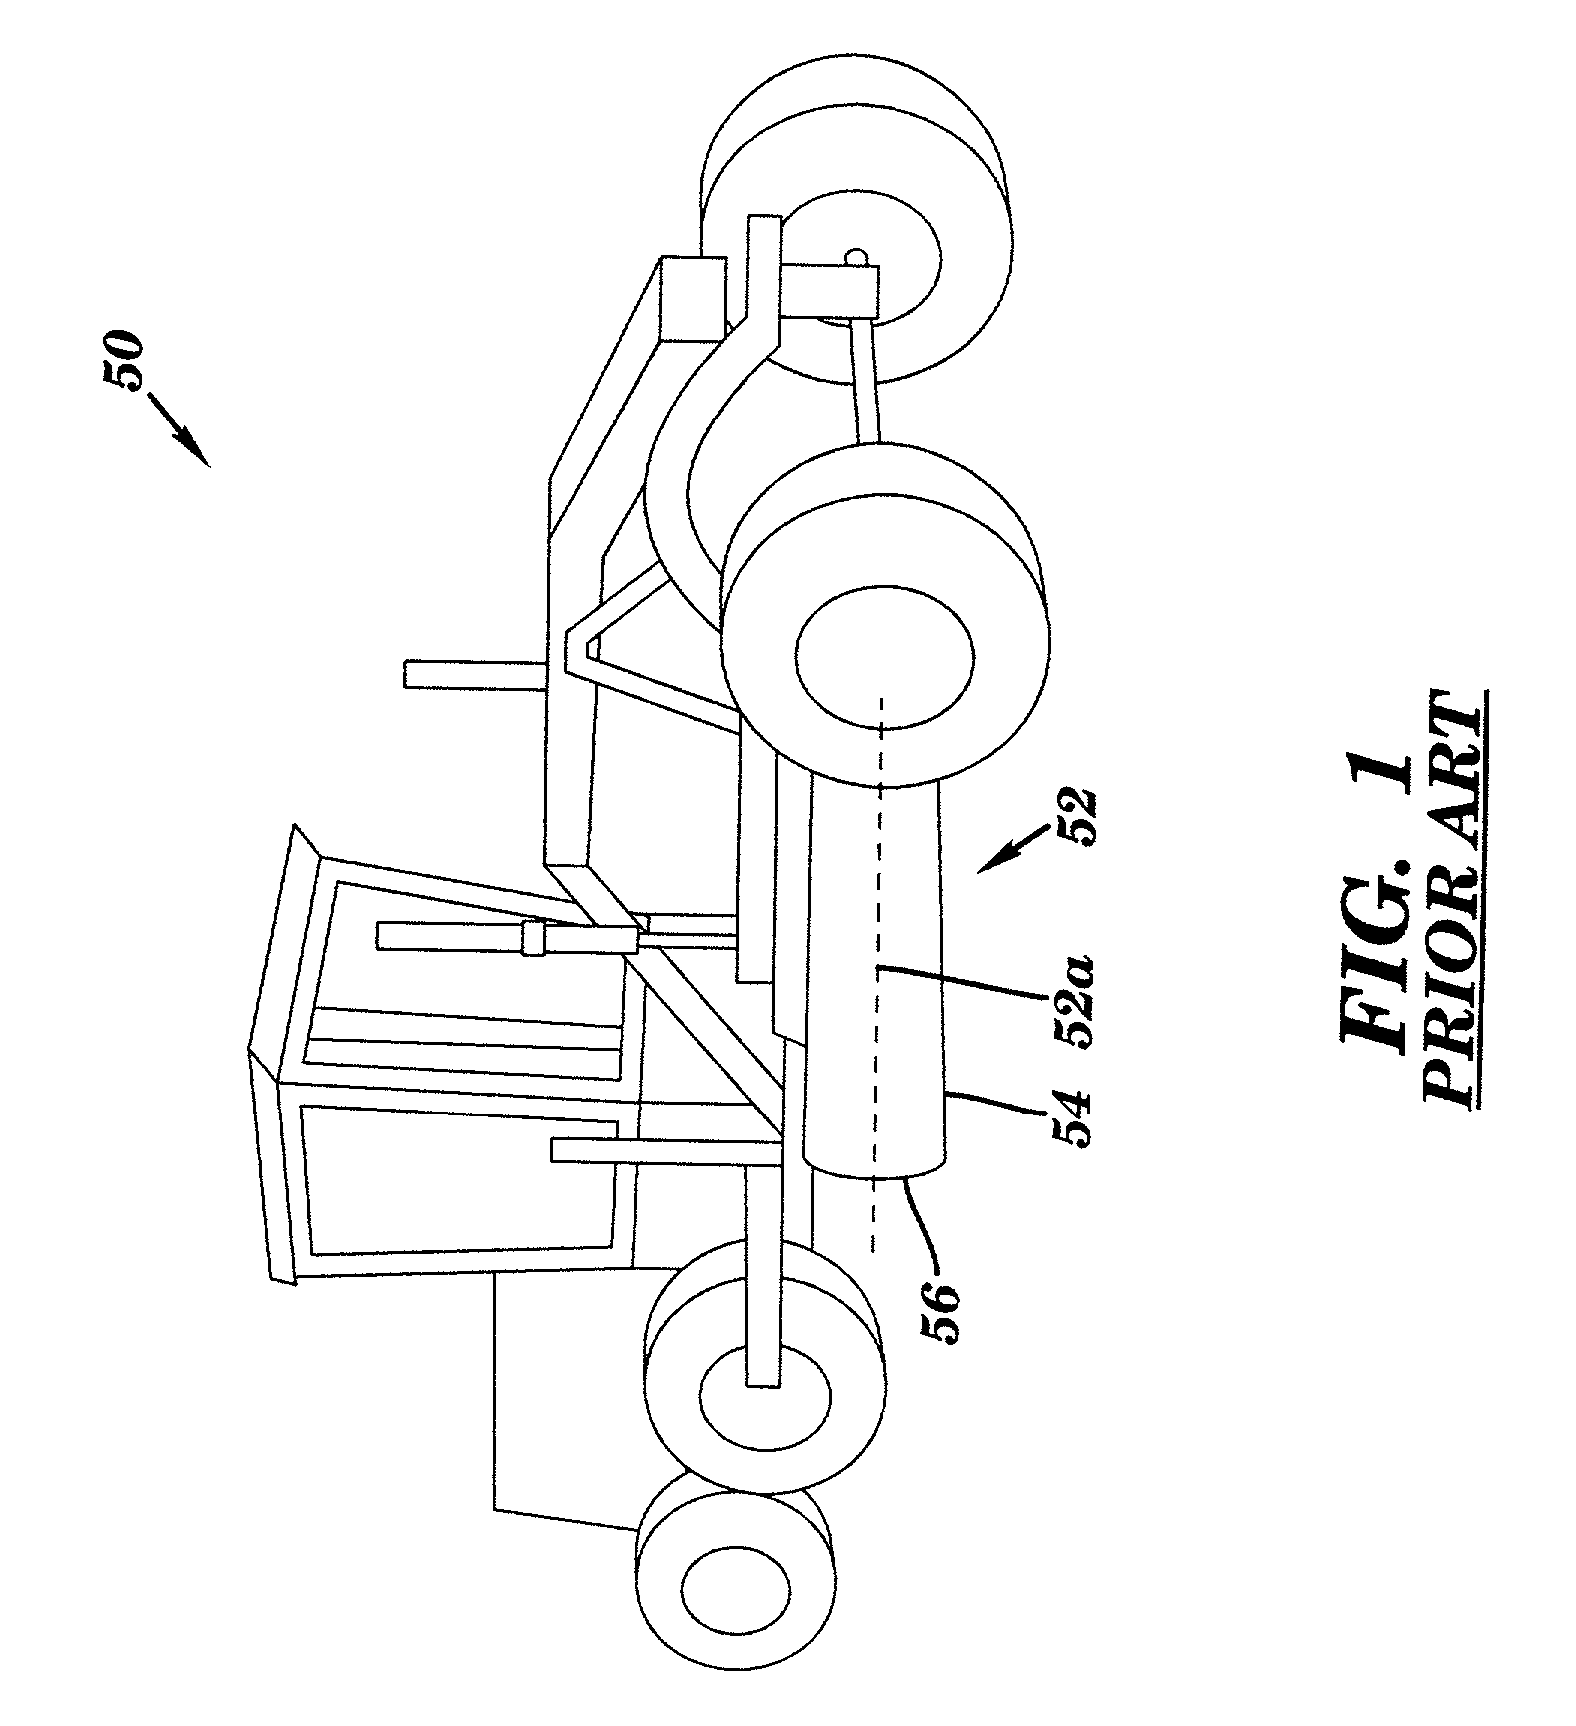 Blade control apparatuses and methods for an earth-moving machine